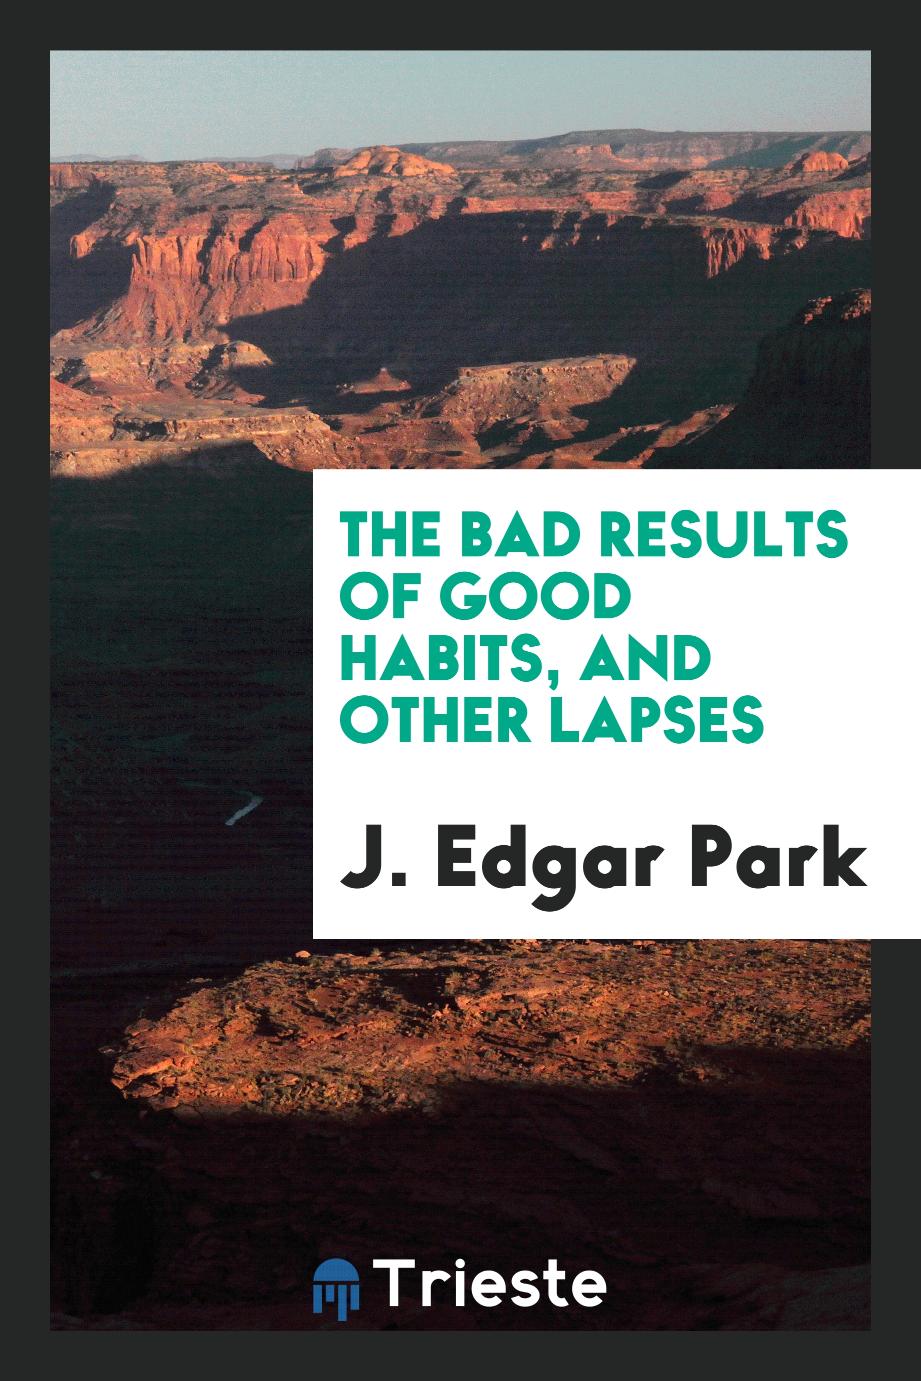 The bad results of good habits, and other lapses